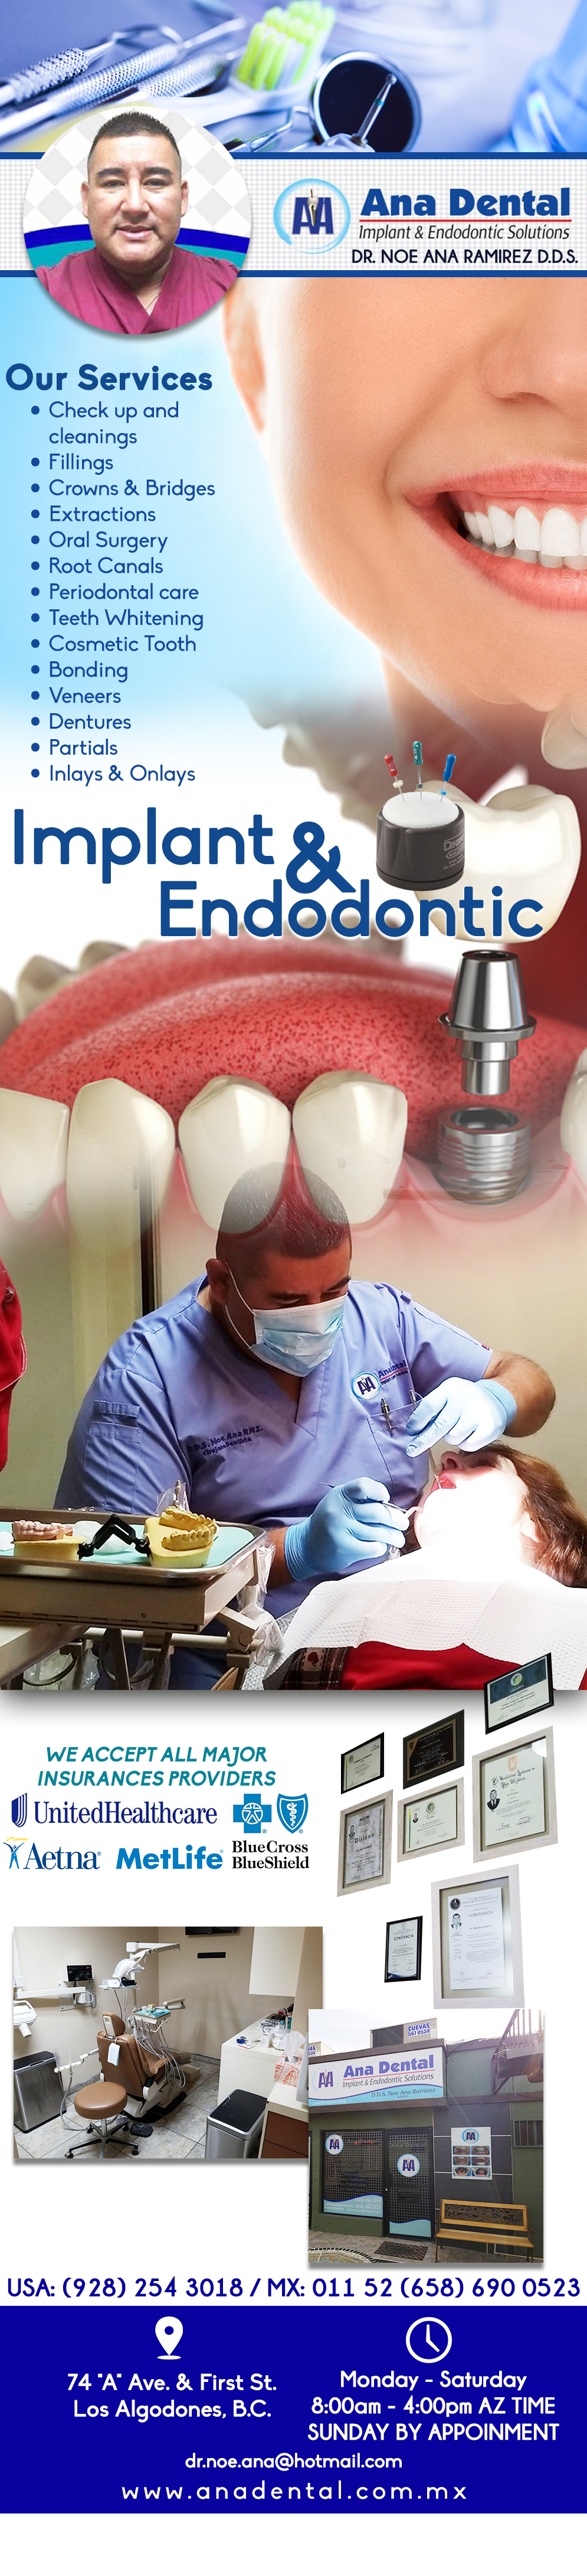 Ana Dental D.D.S. Noe Ana Ramirez-Implant & Endodontic Solutions. Cosmetic Dentistry, Root canal, Therapy, Implants.